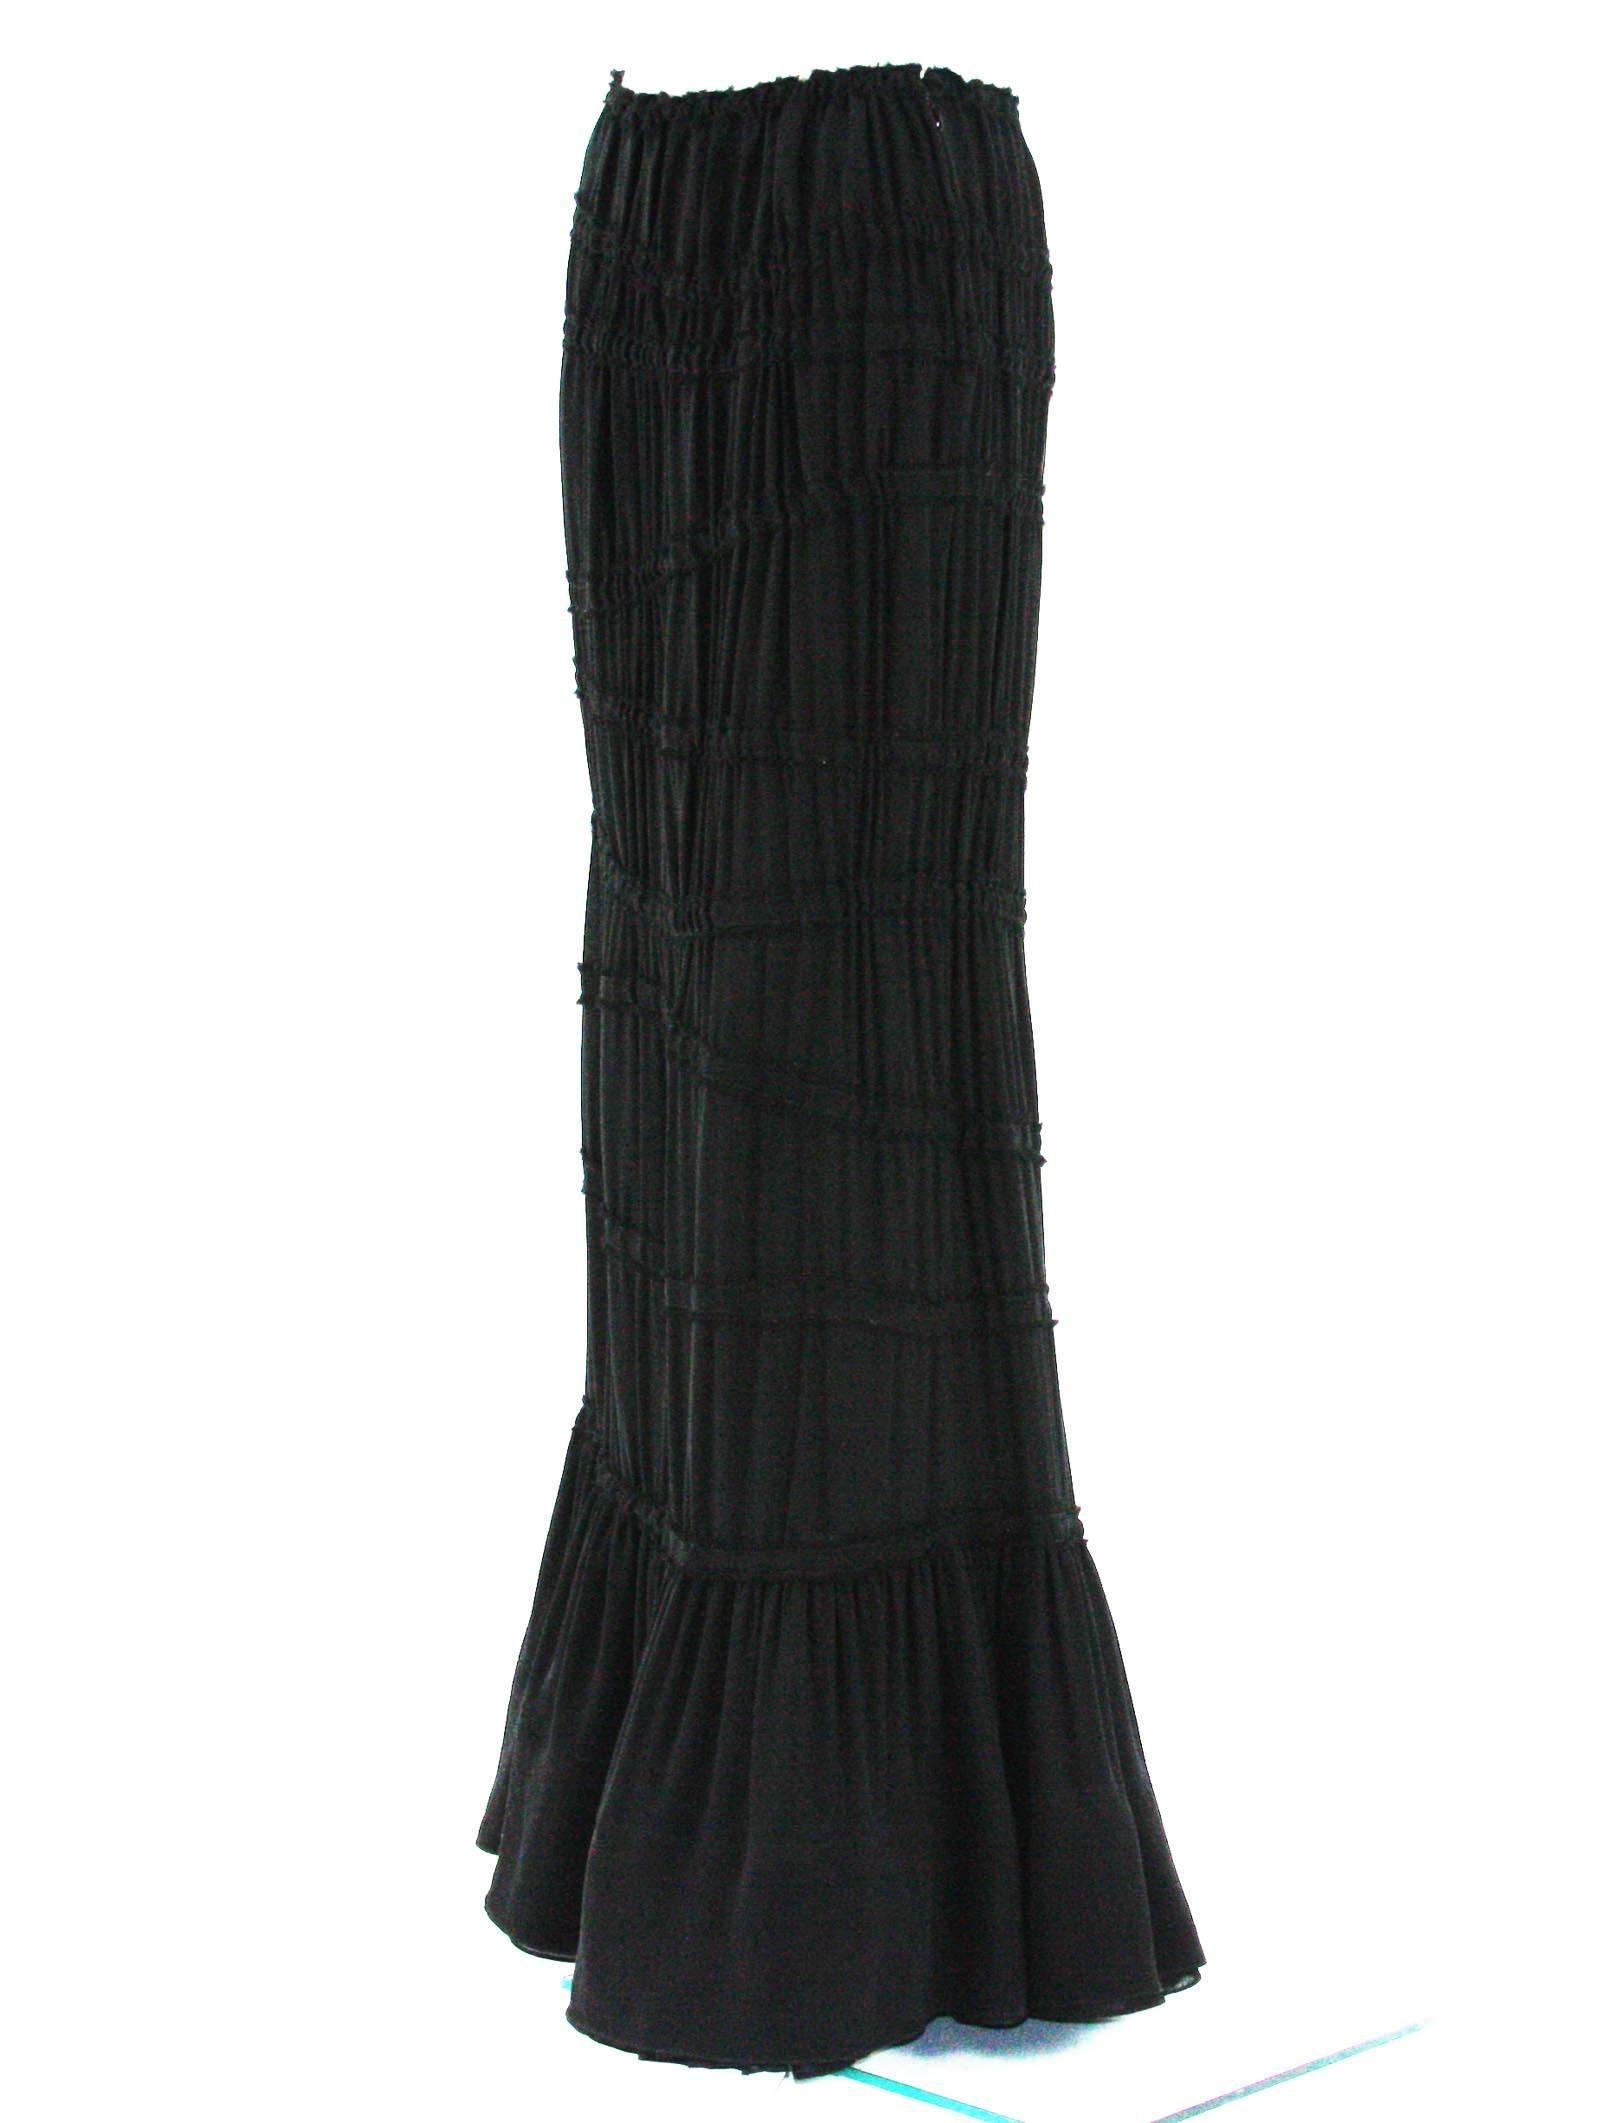 New Tom Ford for Yves Saint Laurent Rive Gauche FW 2001 Ruffled Black Skirt 38 6 In New Condition In Montgomery, TX